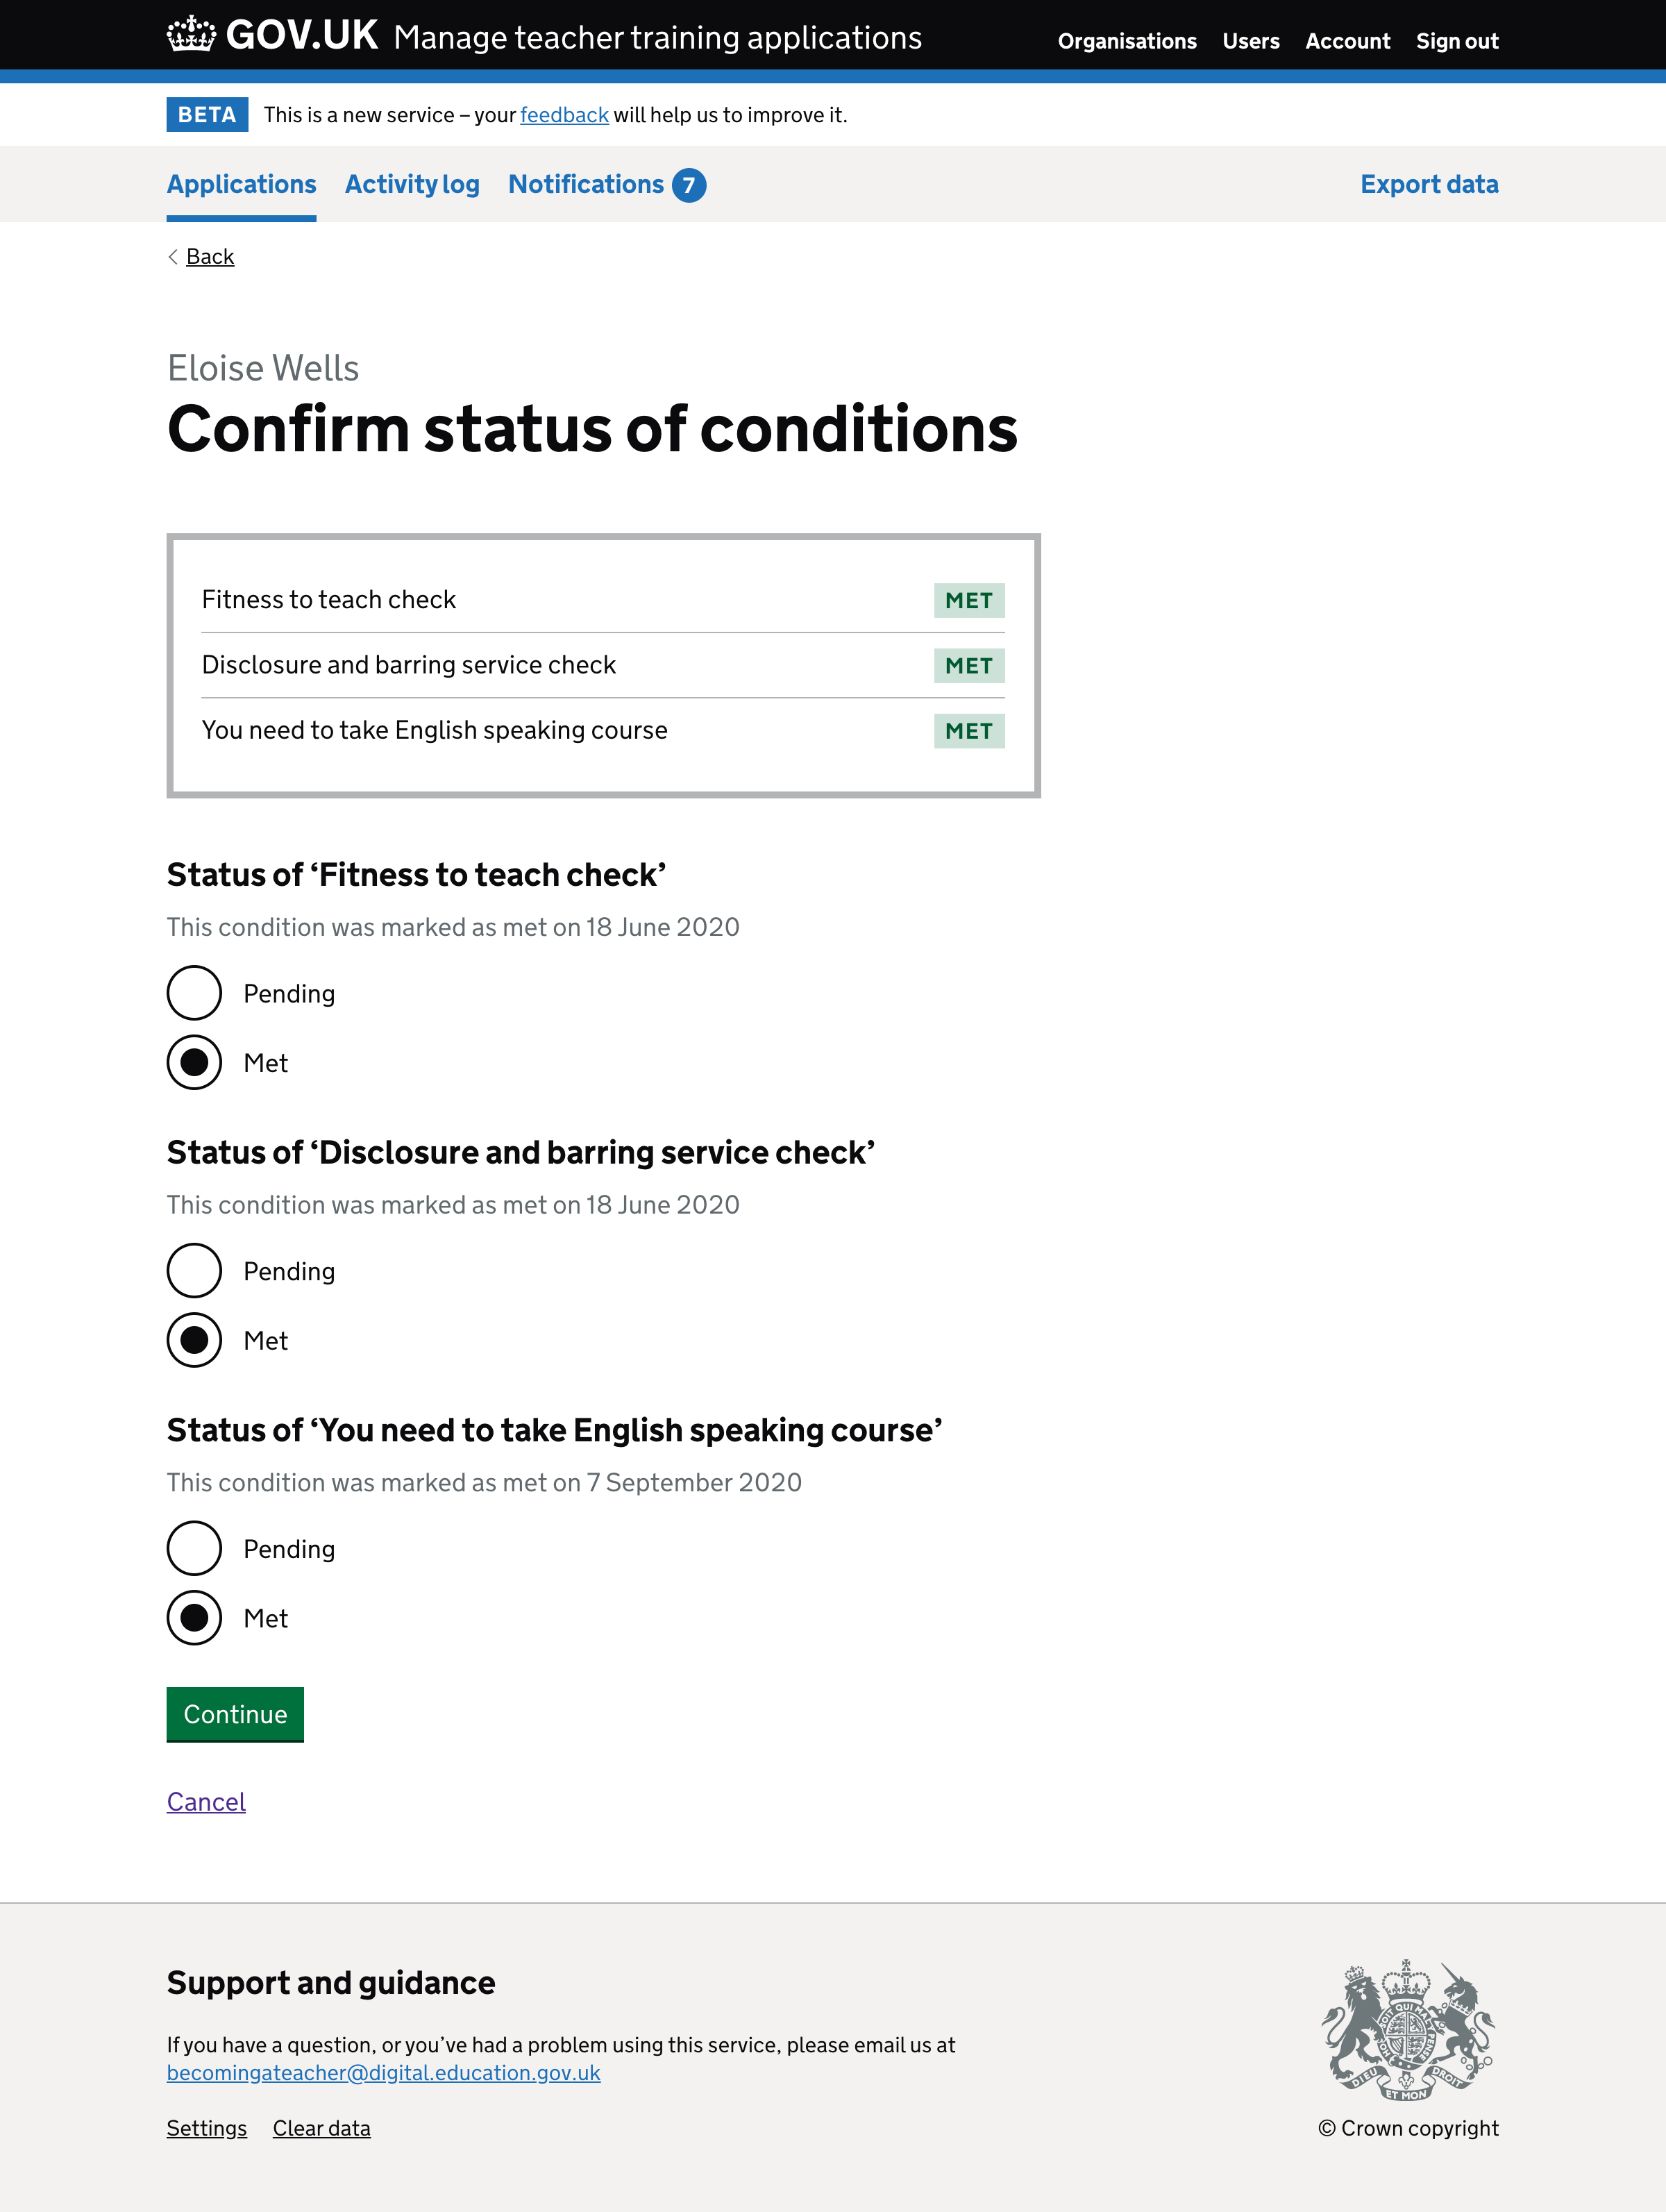 Confirming statuses when the conditions are tracked individually.